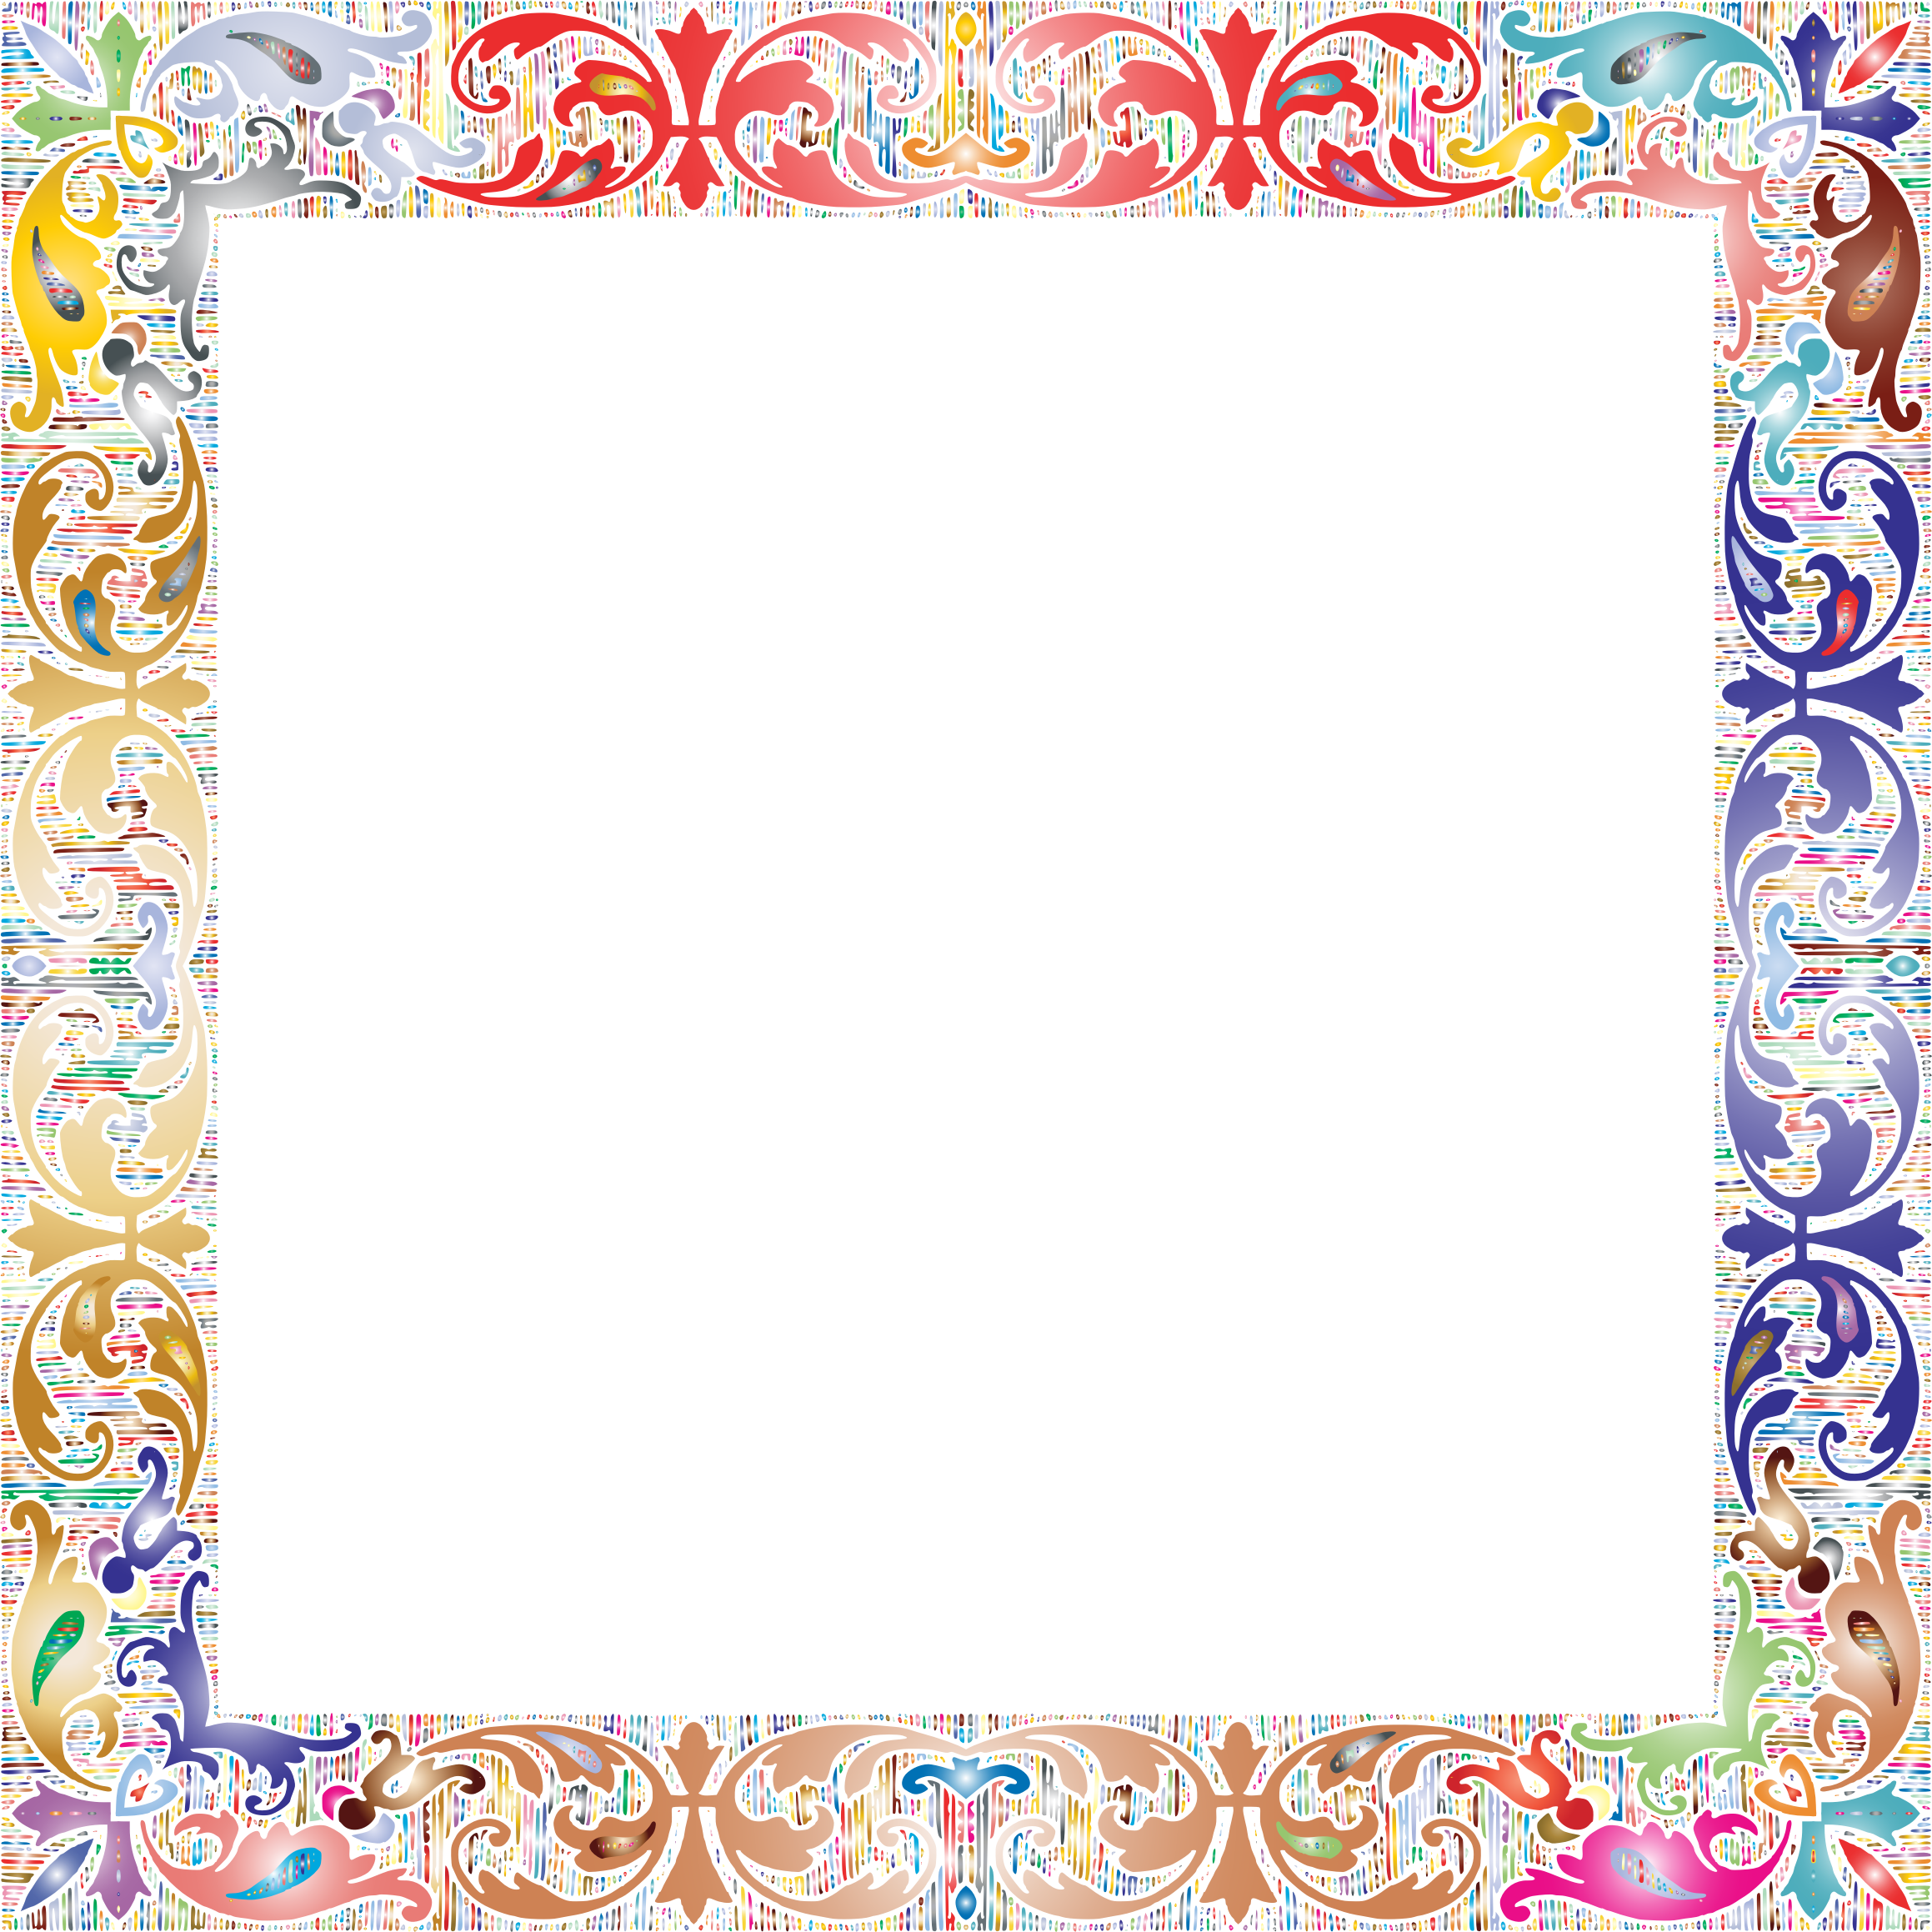 A Colorful Frame With A Black Background